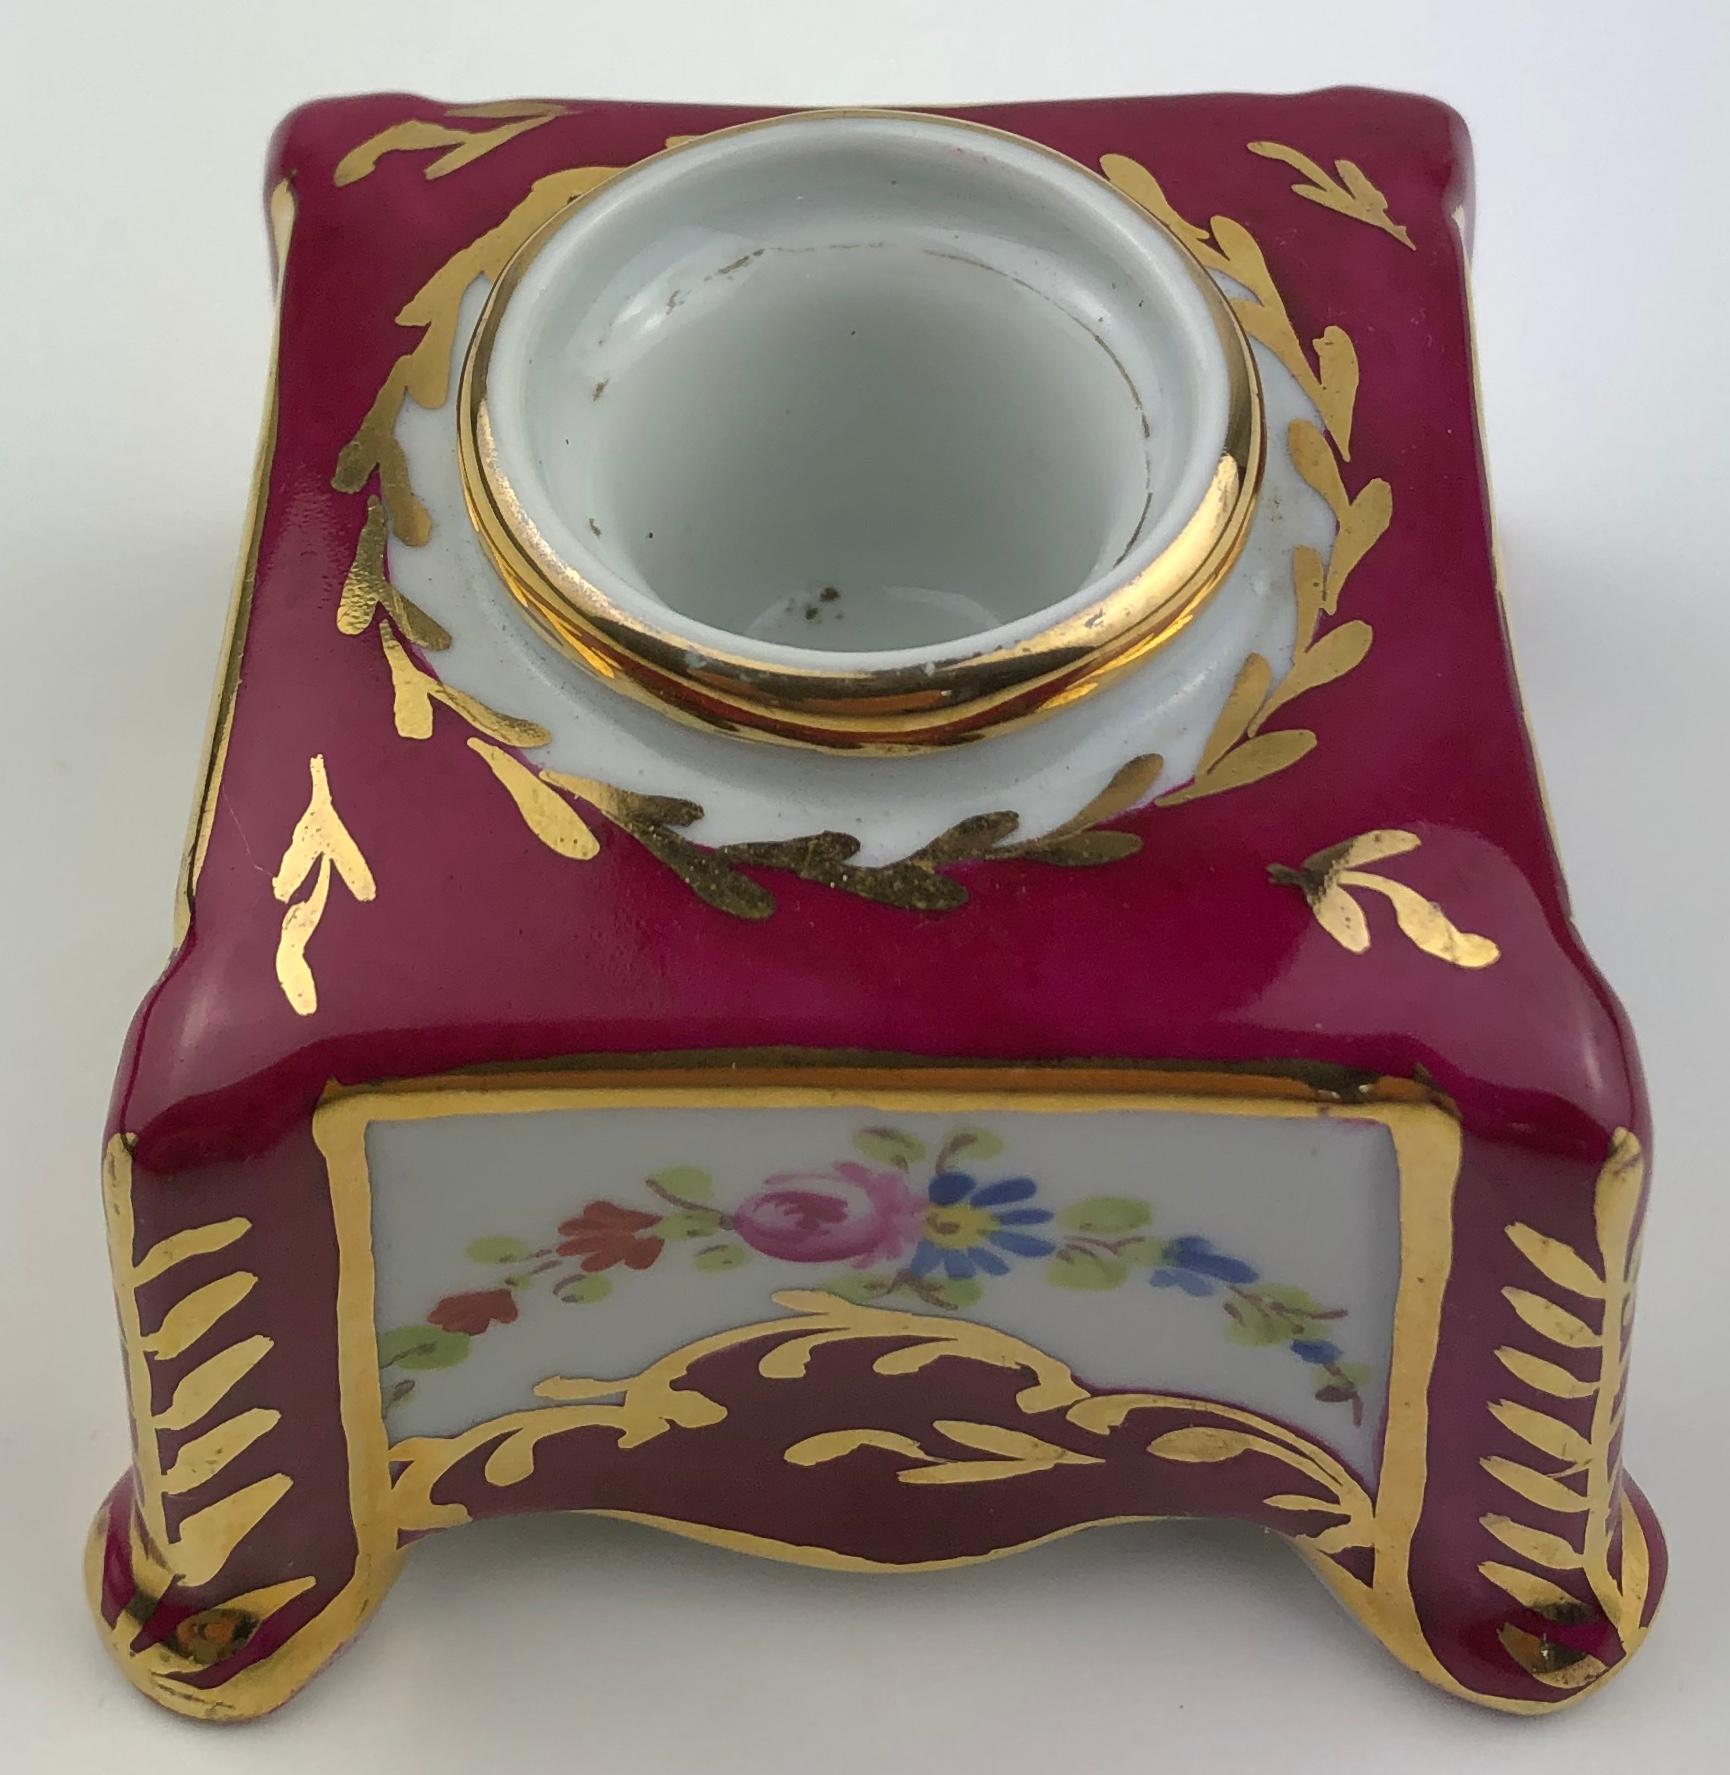 Beautiful hand painted porcelain candleholder by Limoges.
The prominent white and burgundy tones are very pleasing to the eye as are the exquisite details including gold trims with accentuating floral designs. 

Very good condition, no cracks or